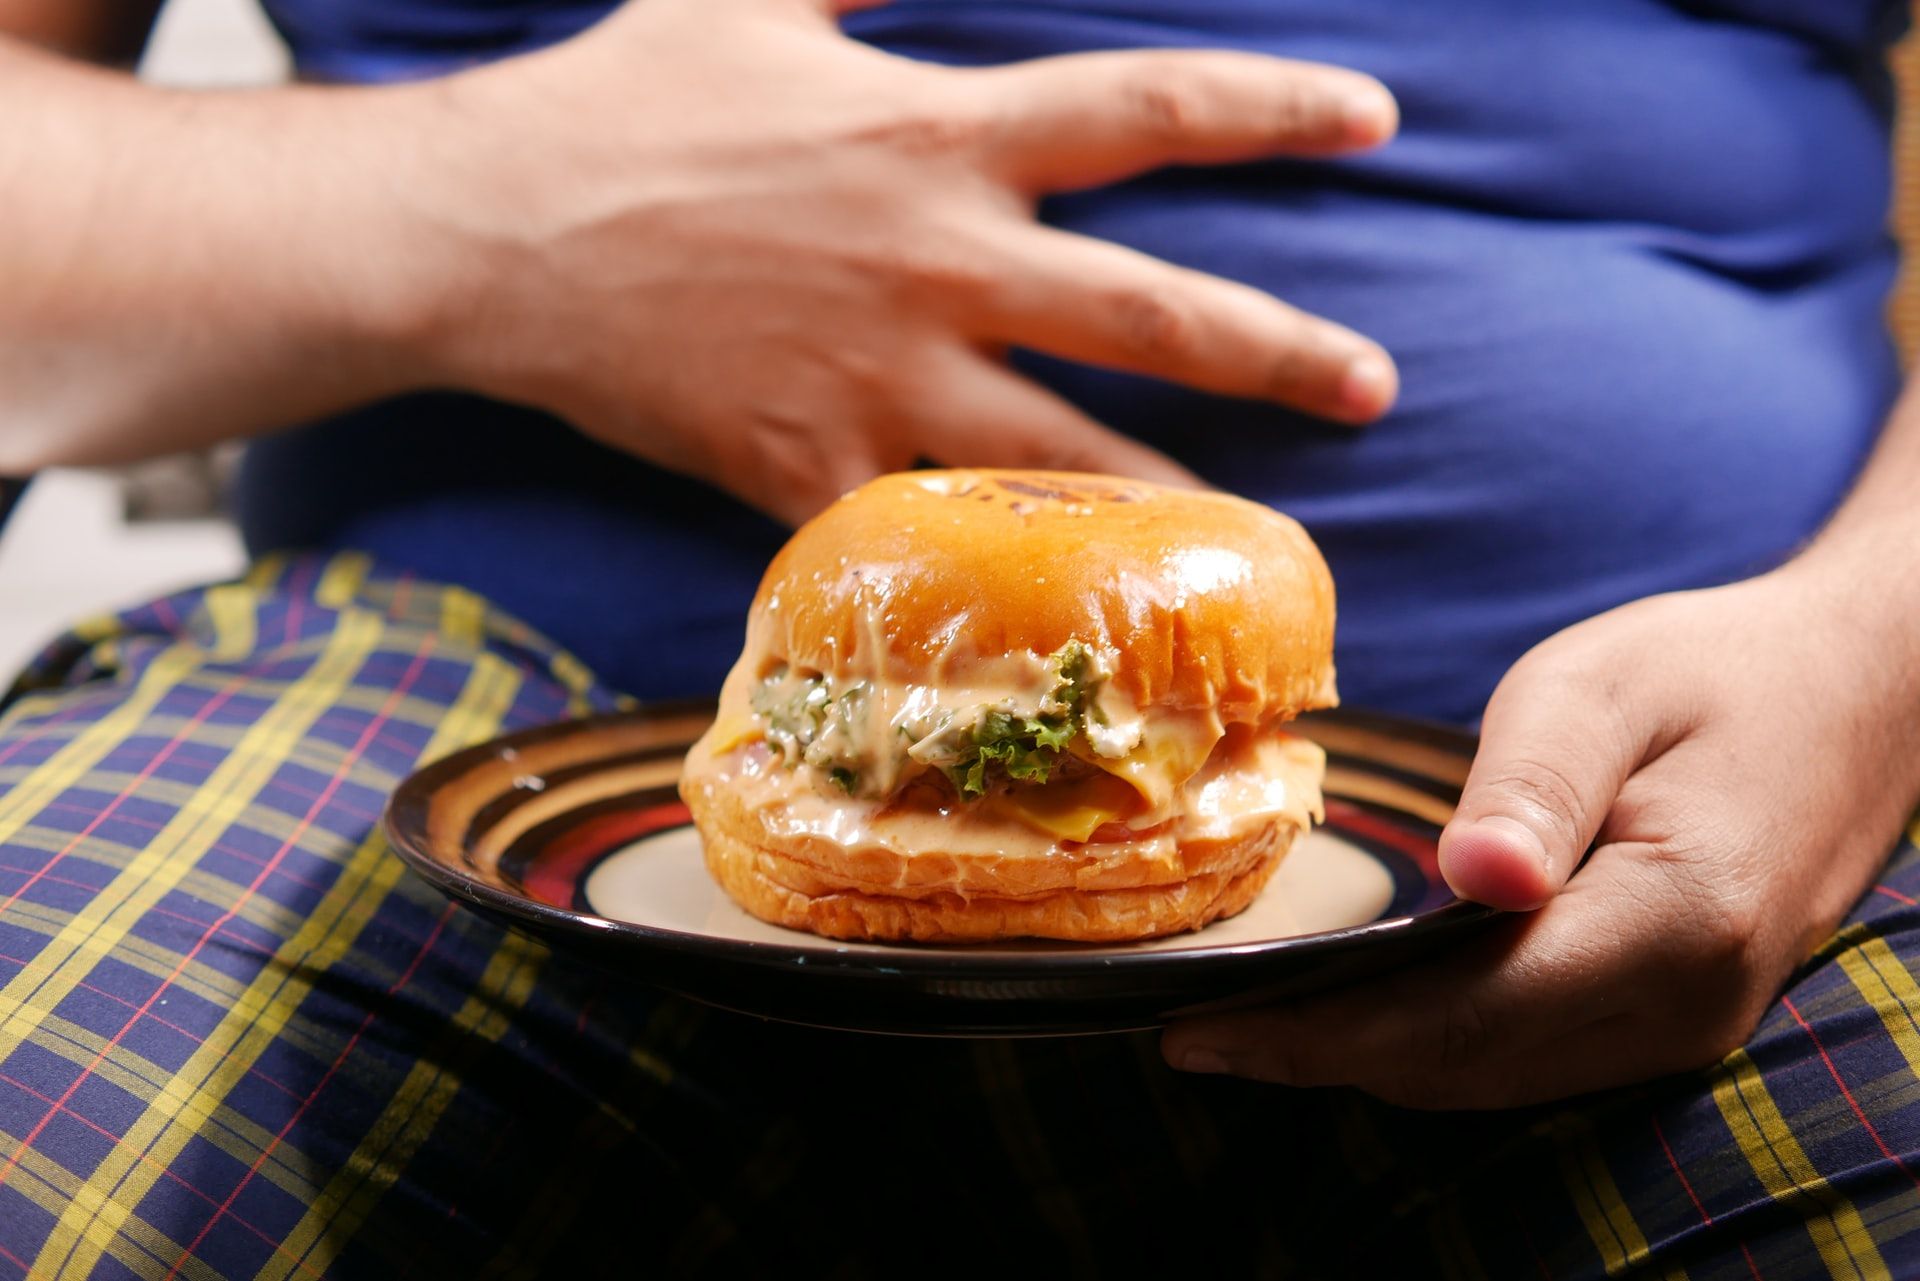 Fat Man Placing One Hand on Belly While Holding Burger In A Plate